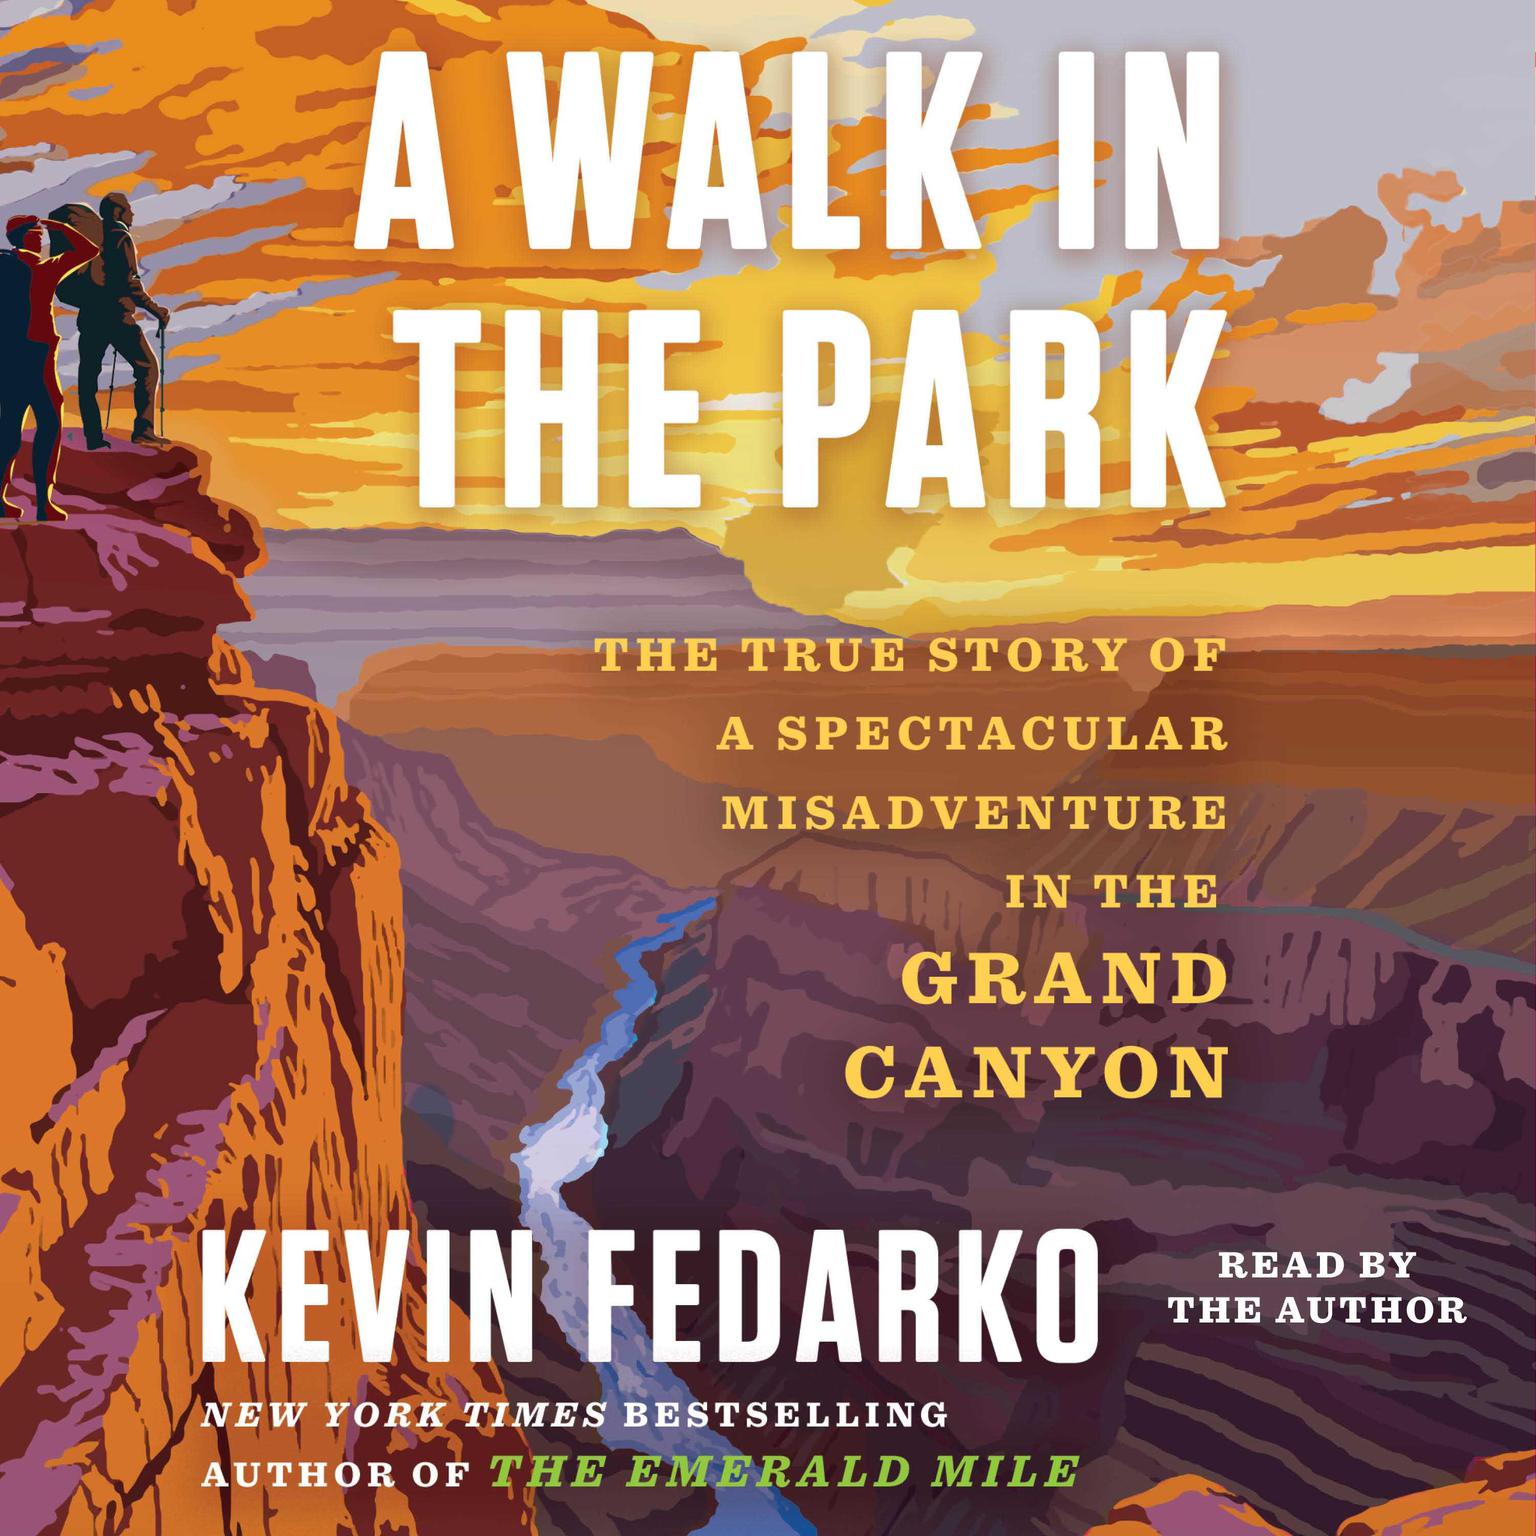 A Walk in the Park: The True Story of a Spectacular Misadventure in the Grand Canyon Audiobook, by Kevin Fedarko